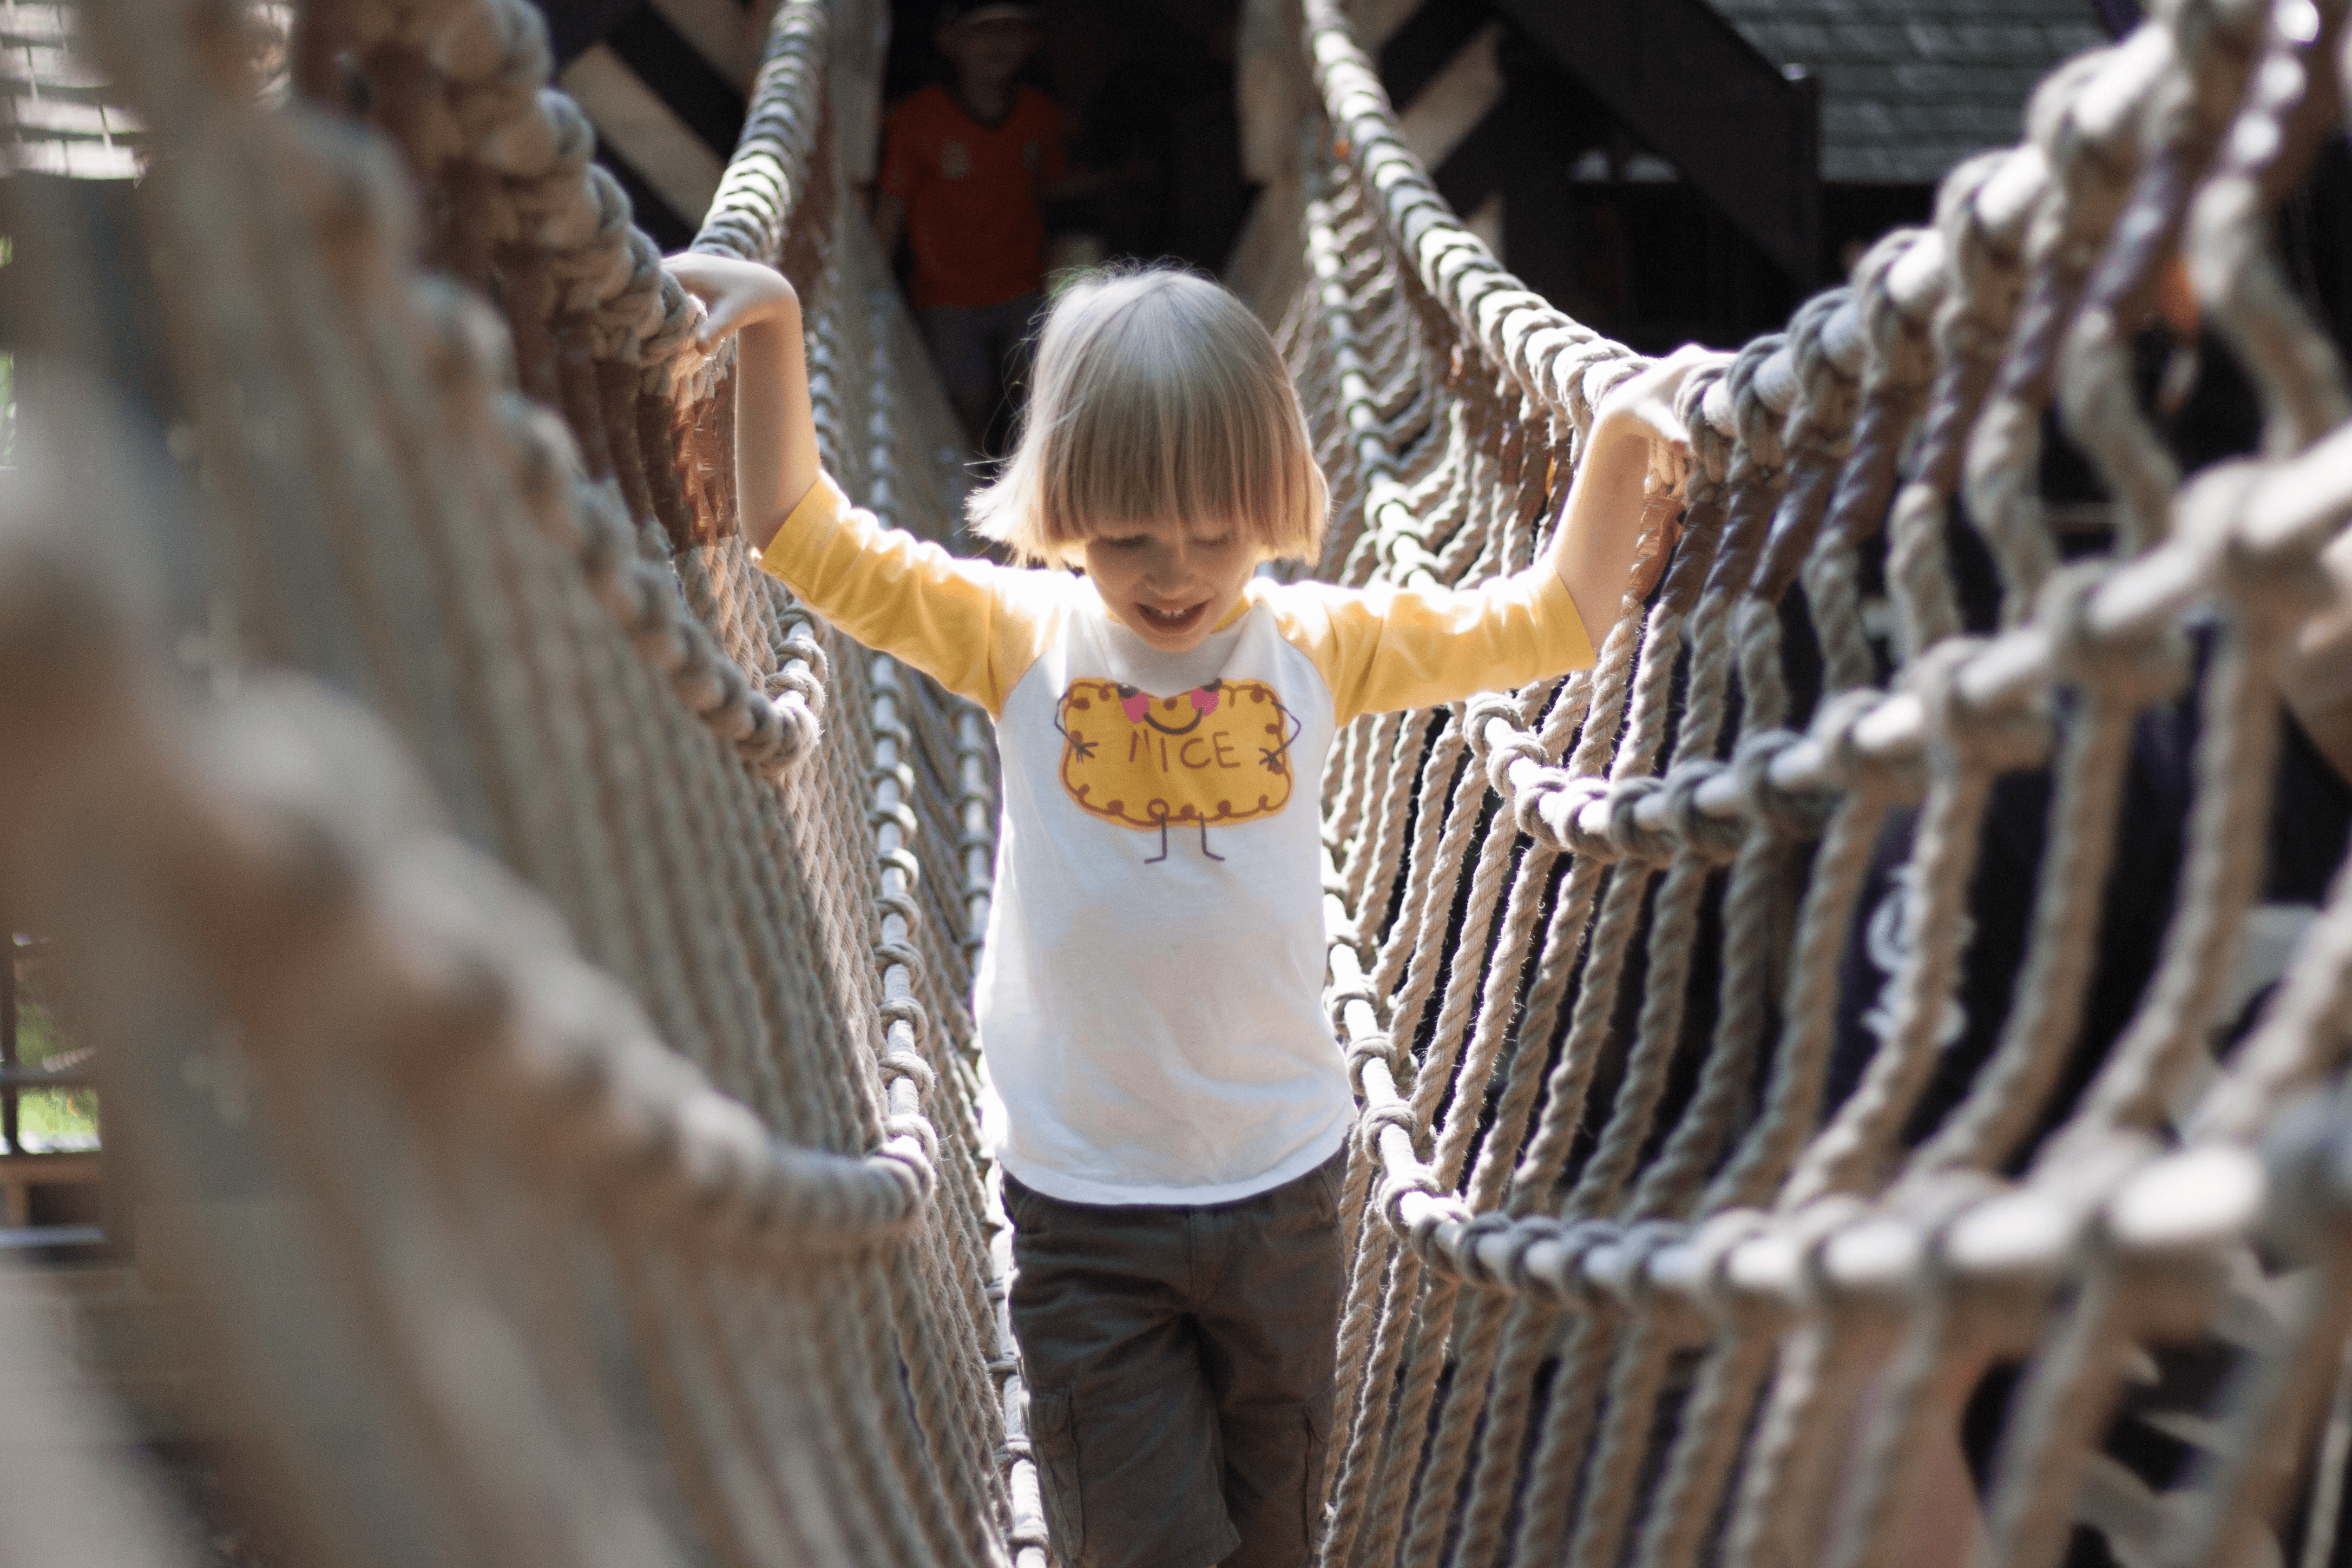 Toby crossing a rope bridge in the play area at Salmesbury Hall